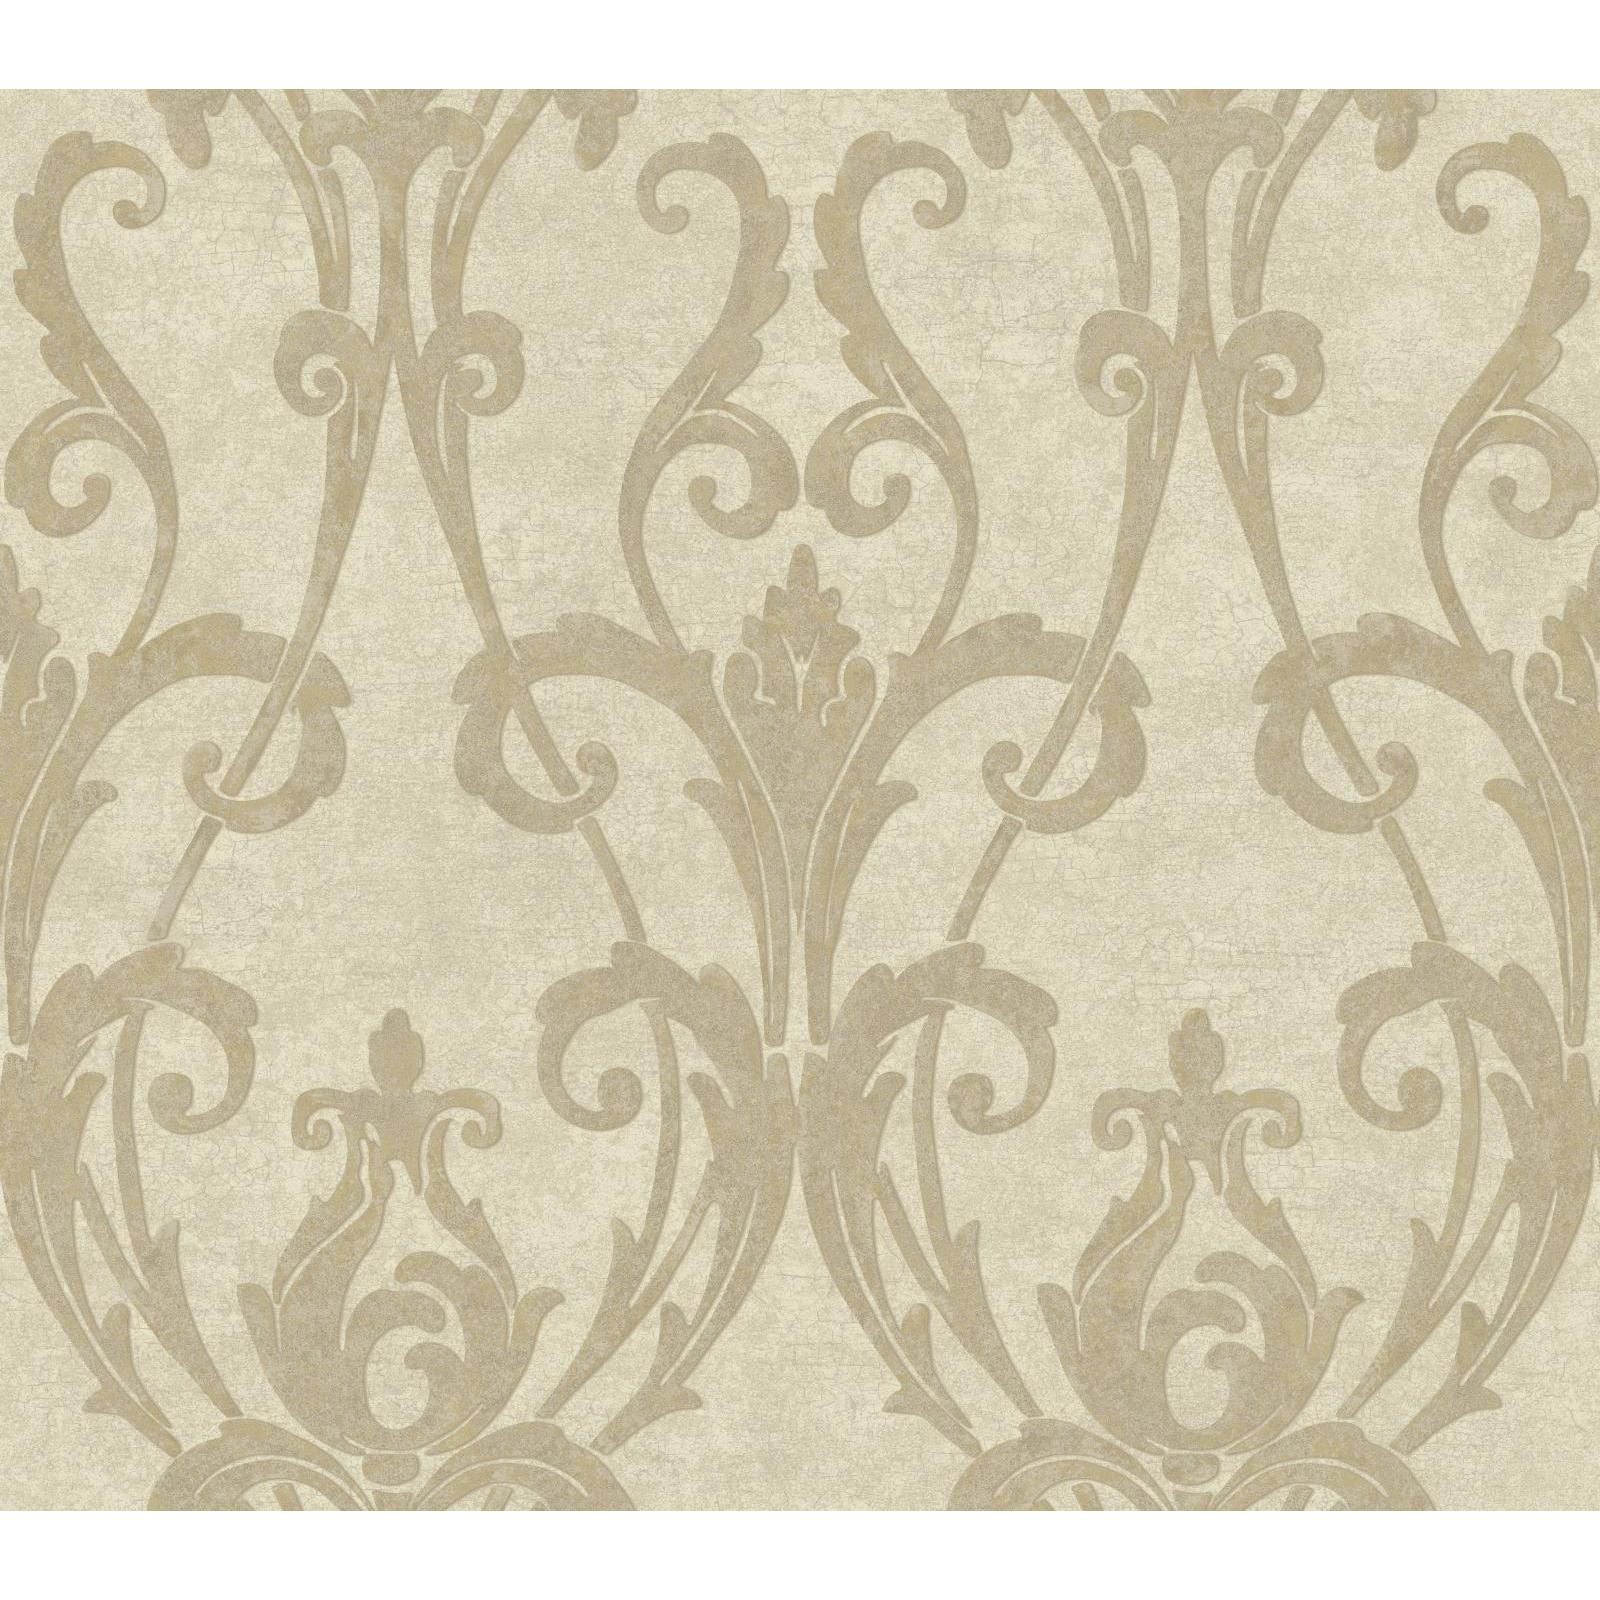 York Wallcoverings Beige  Ogee Damask Wallpaper in Cream, Silvery Taupe